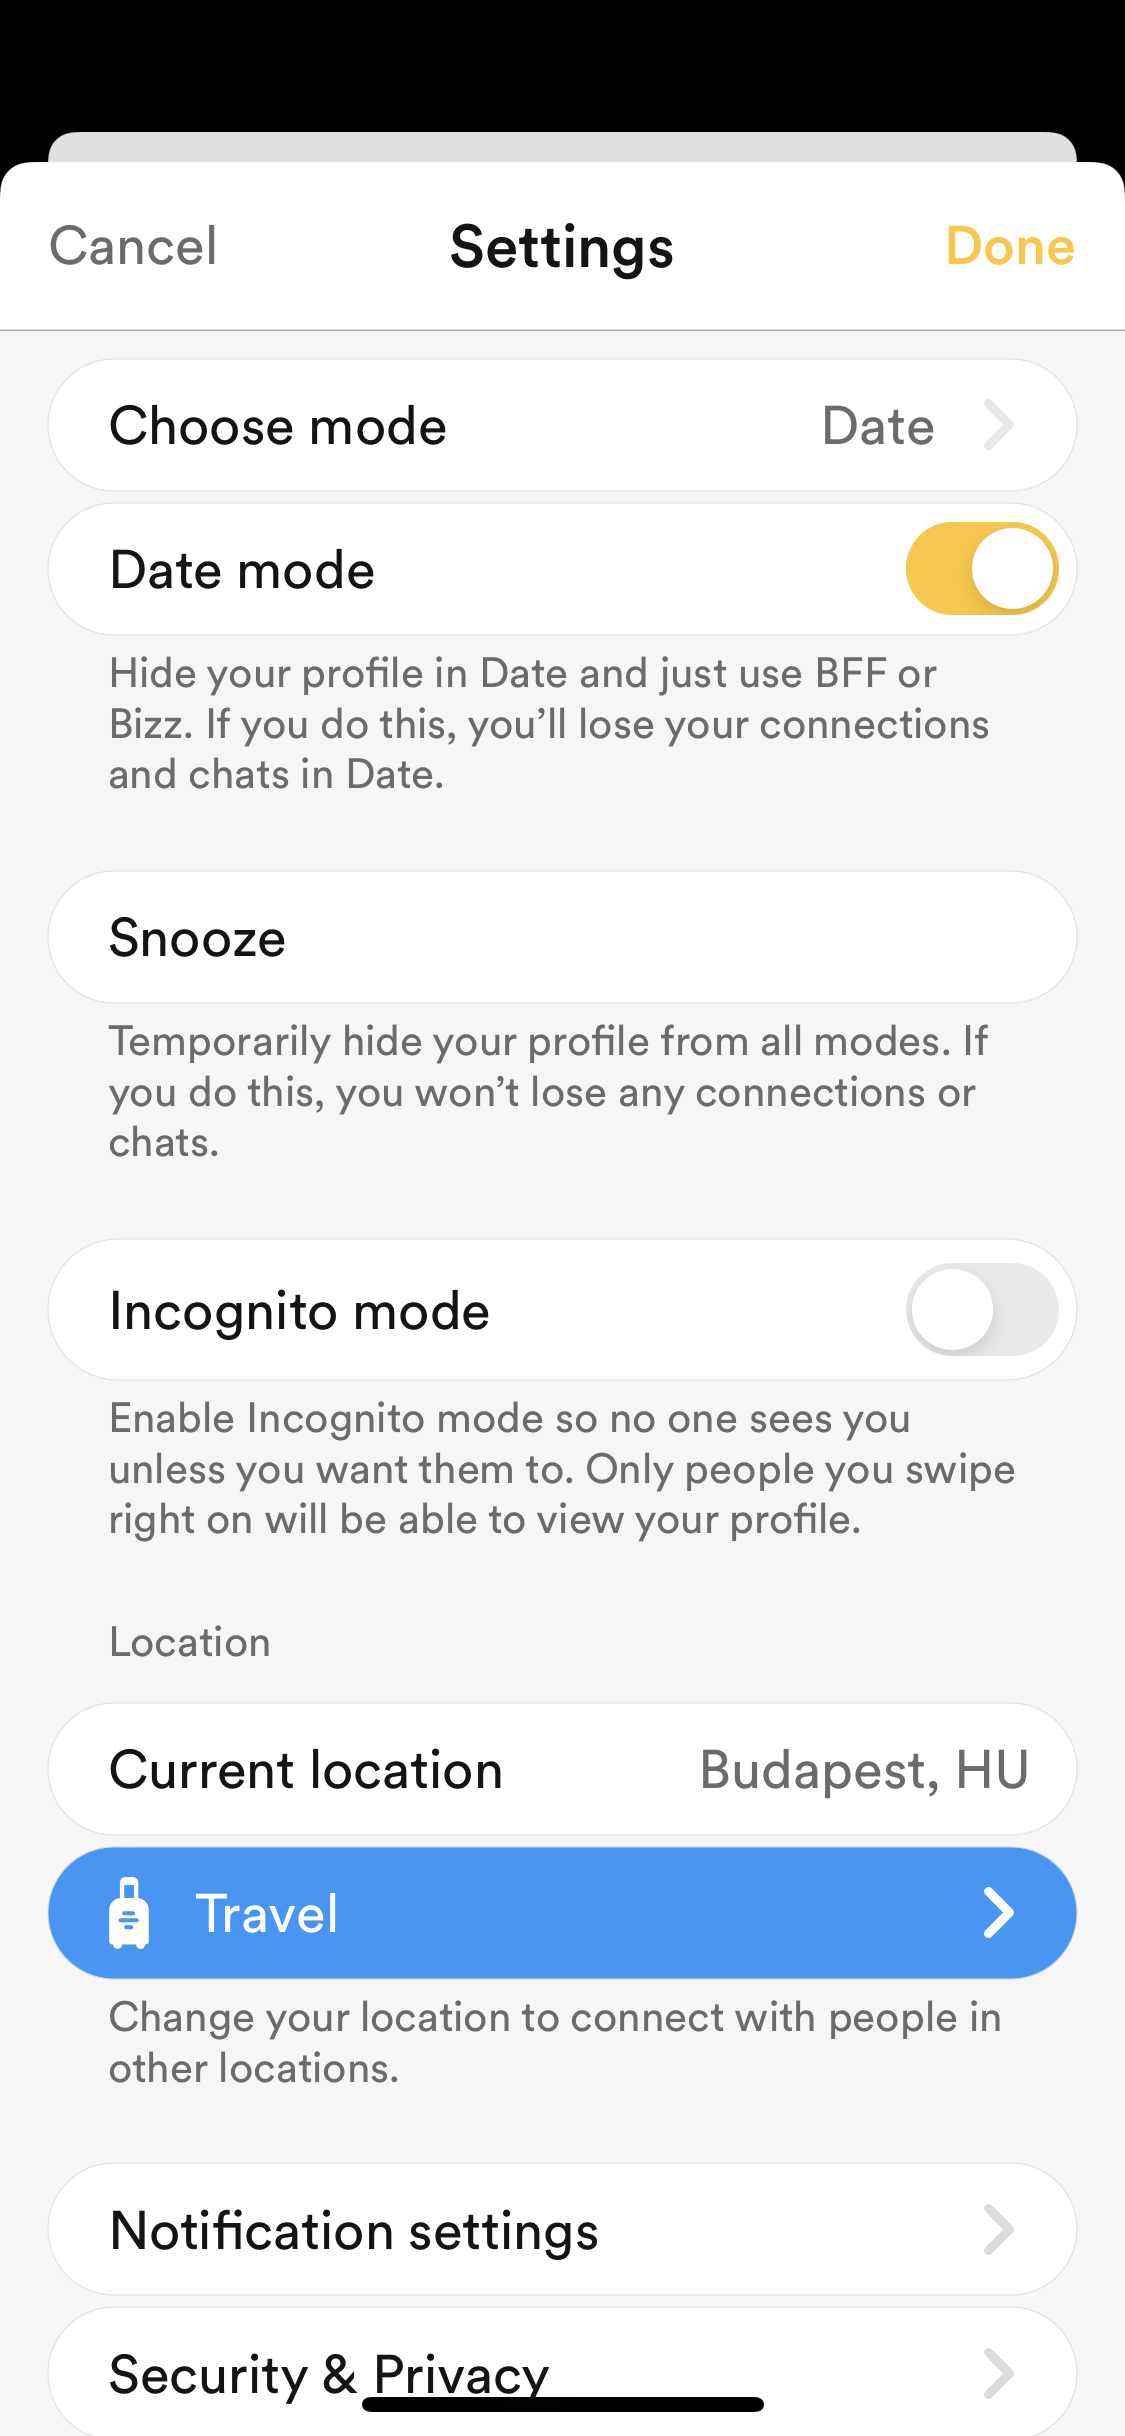 Screenshot of Settings on Deleting your account on Bumble user flow